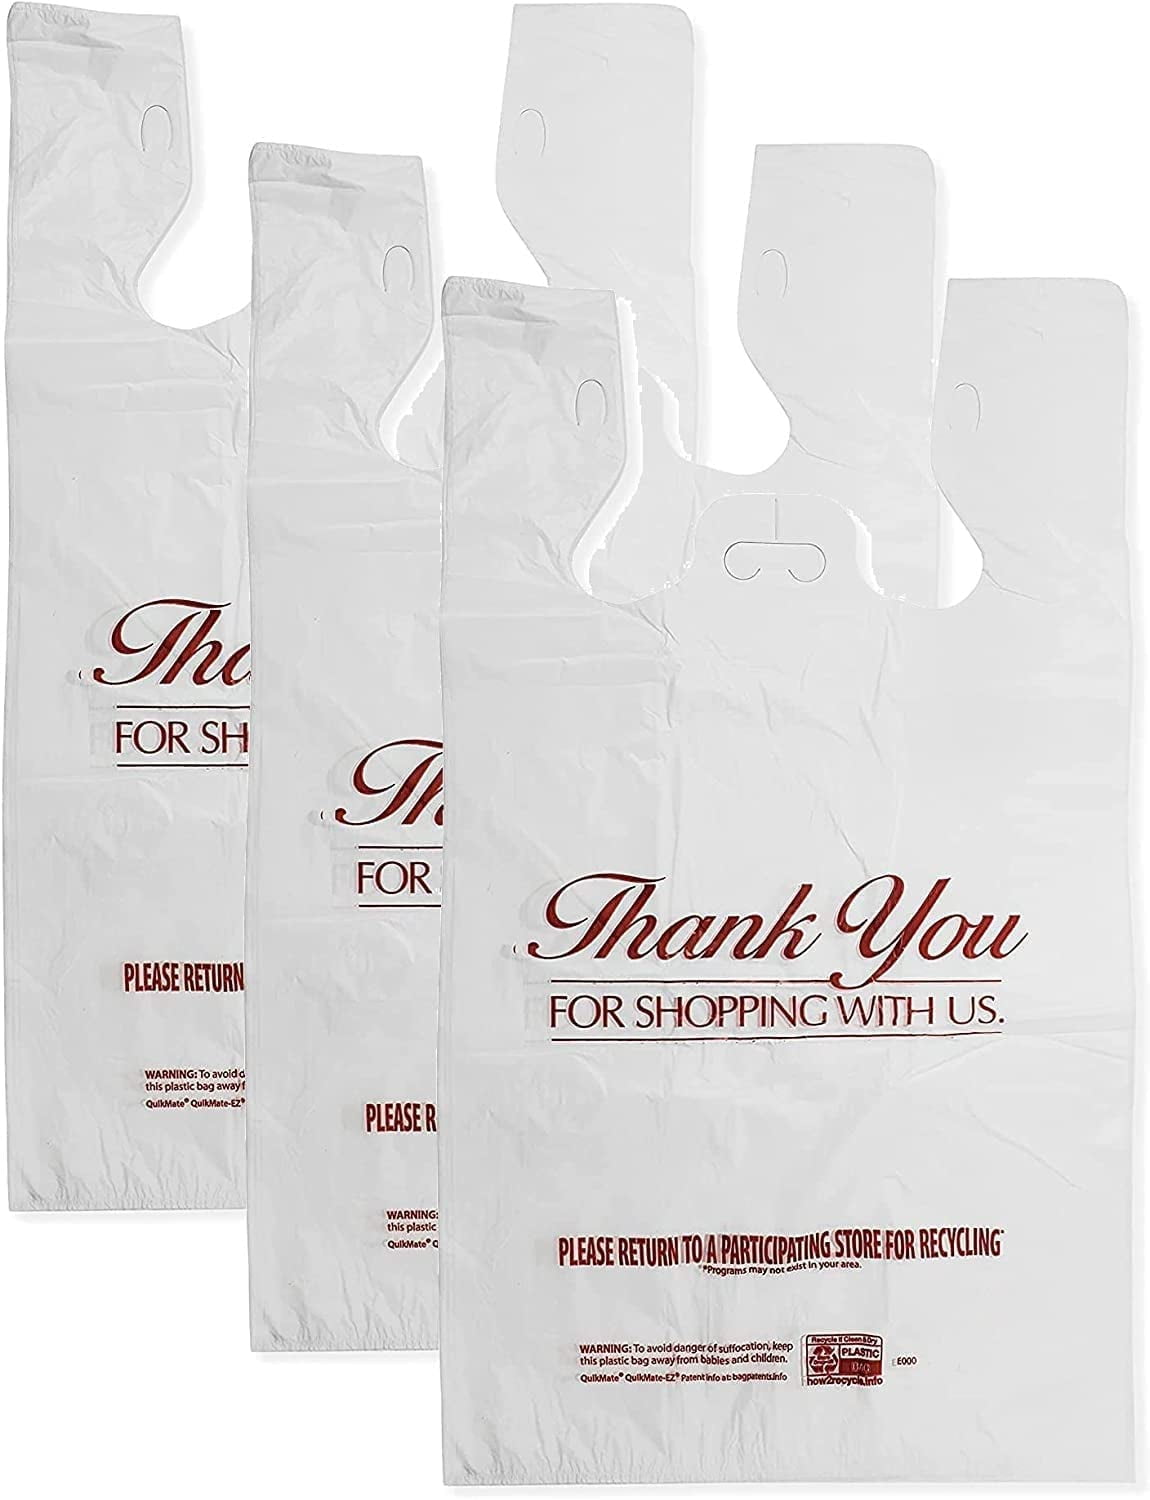 Plastic Shopping Bags: Options for Your Business